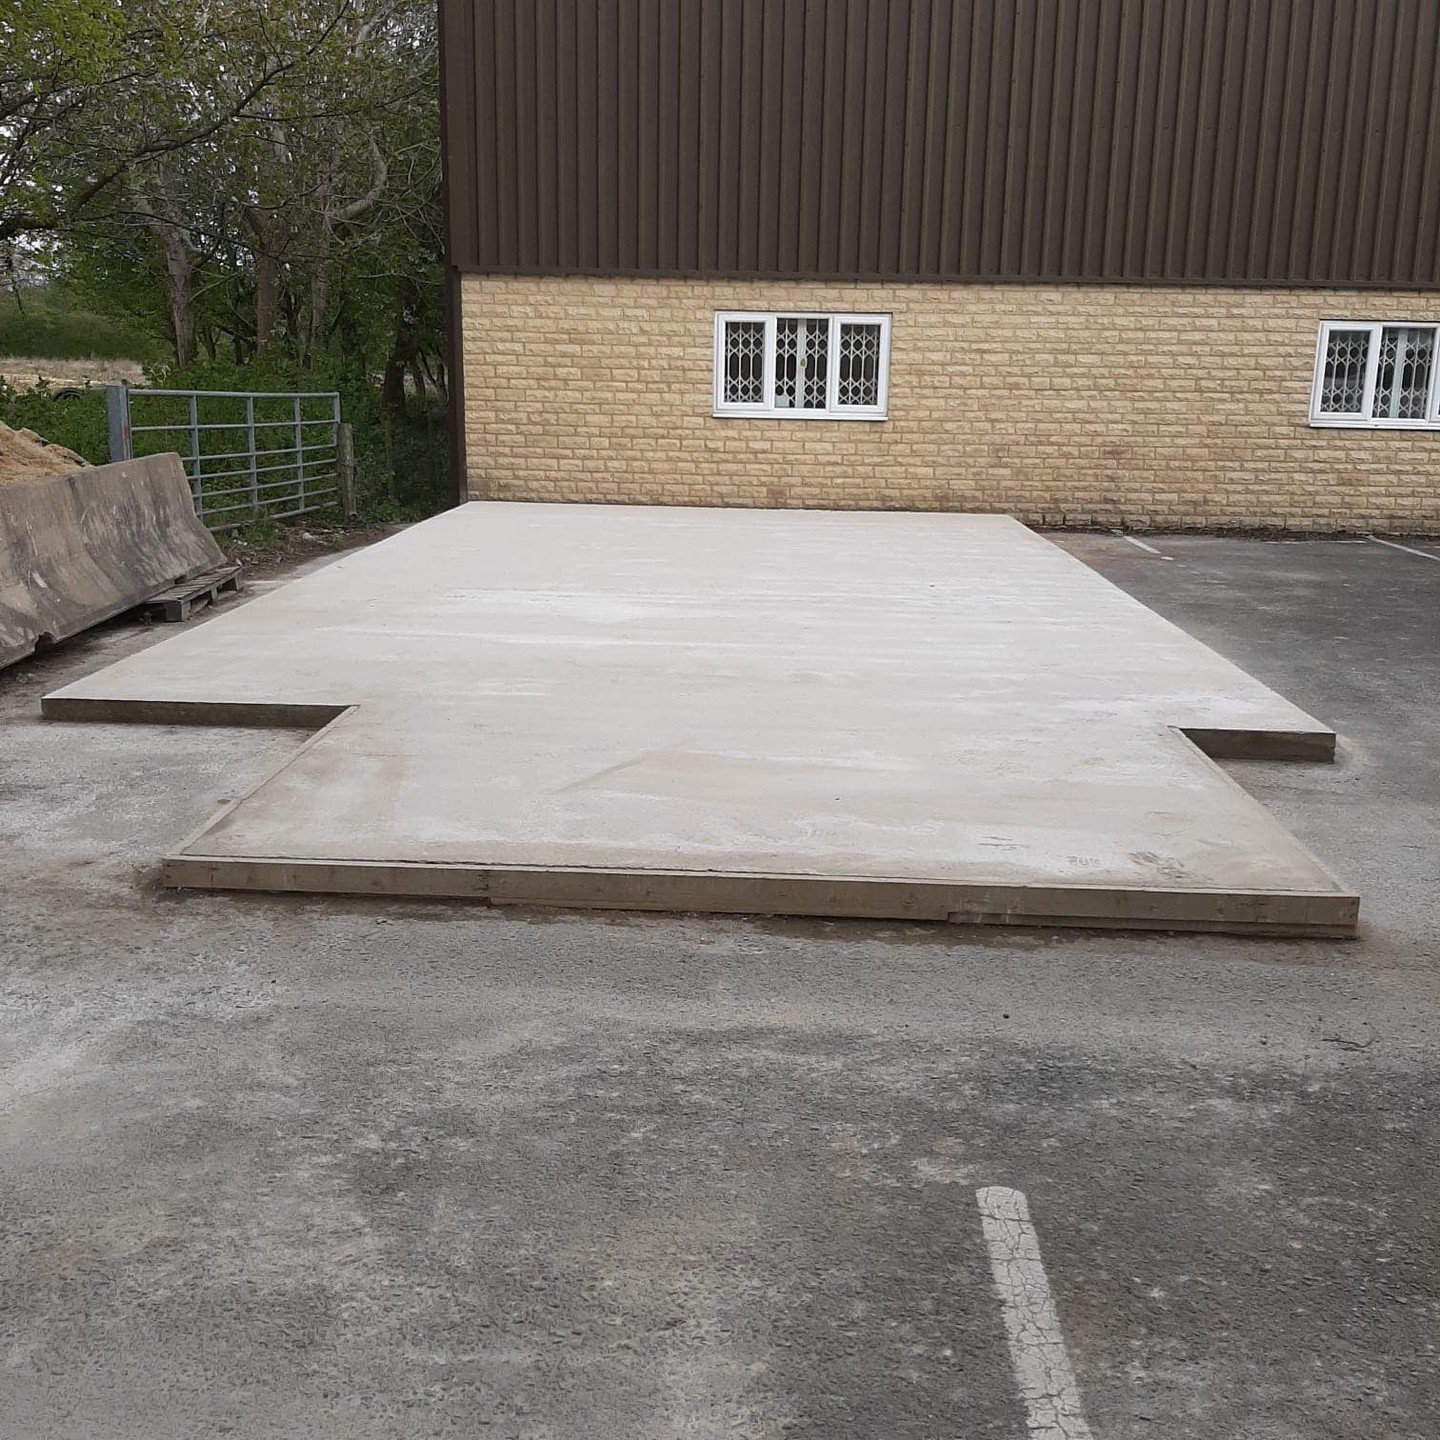 Over the past few weeks, concrete pads have been successfully installed, one of which is designated for an outdoor fridge/freezer, with additional smaller pads laid out for air conditioning units.